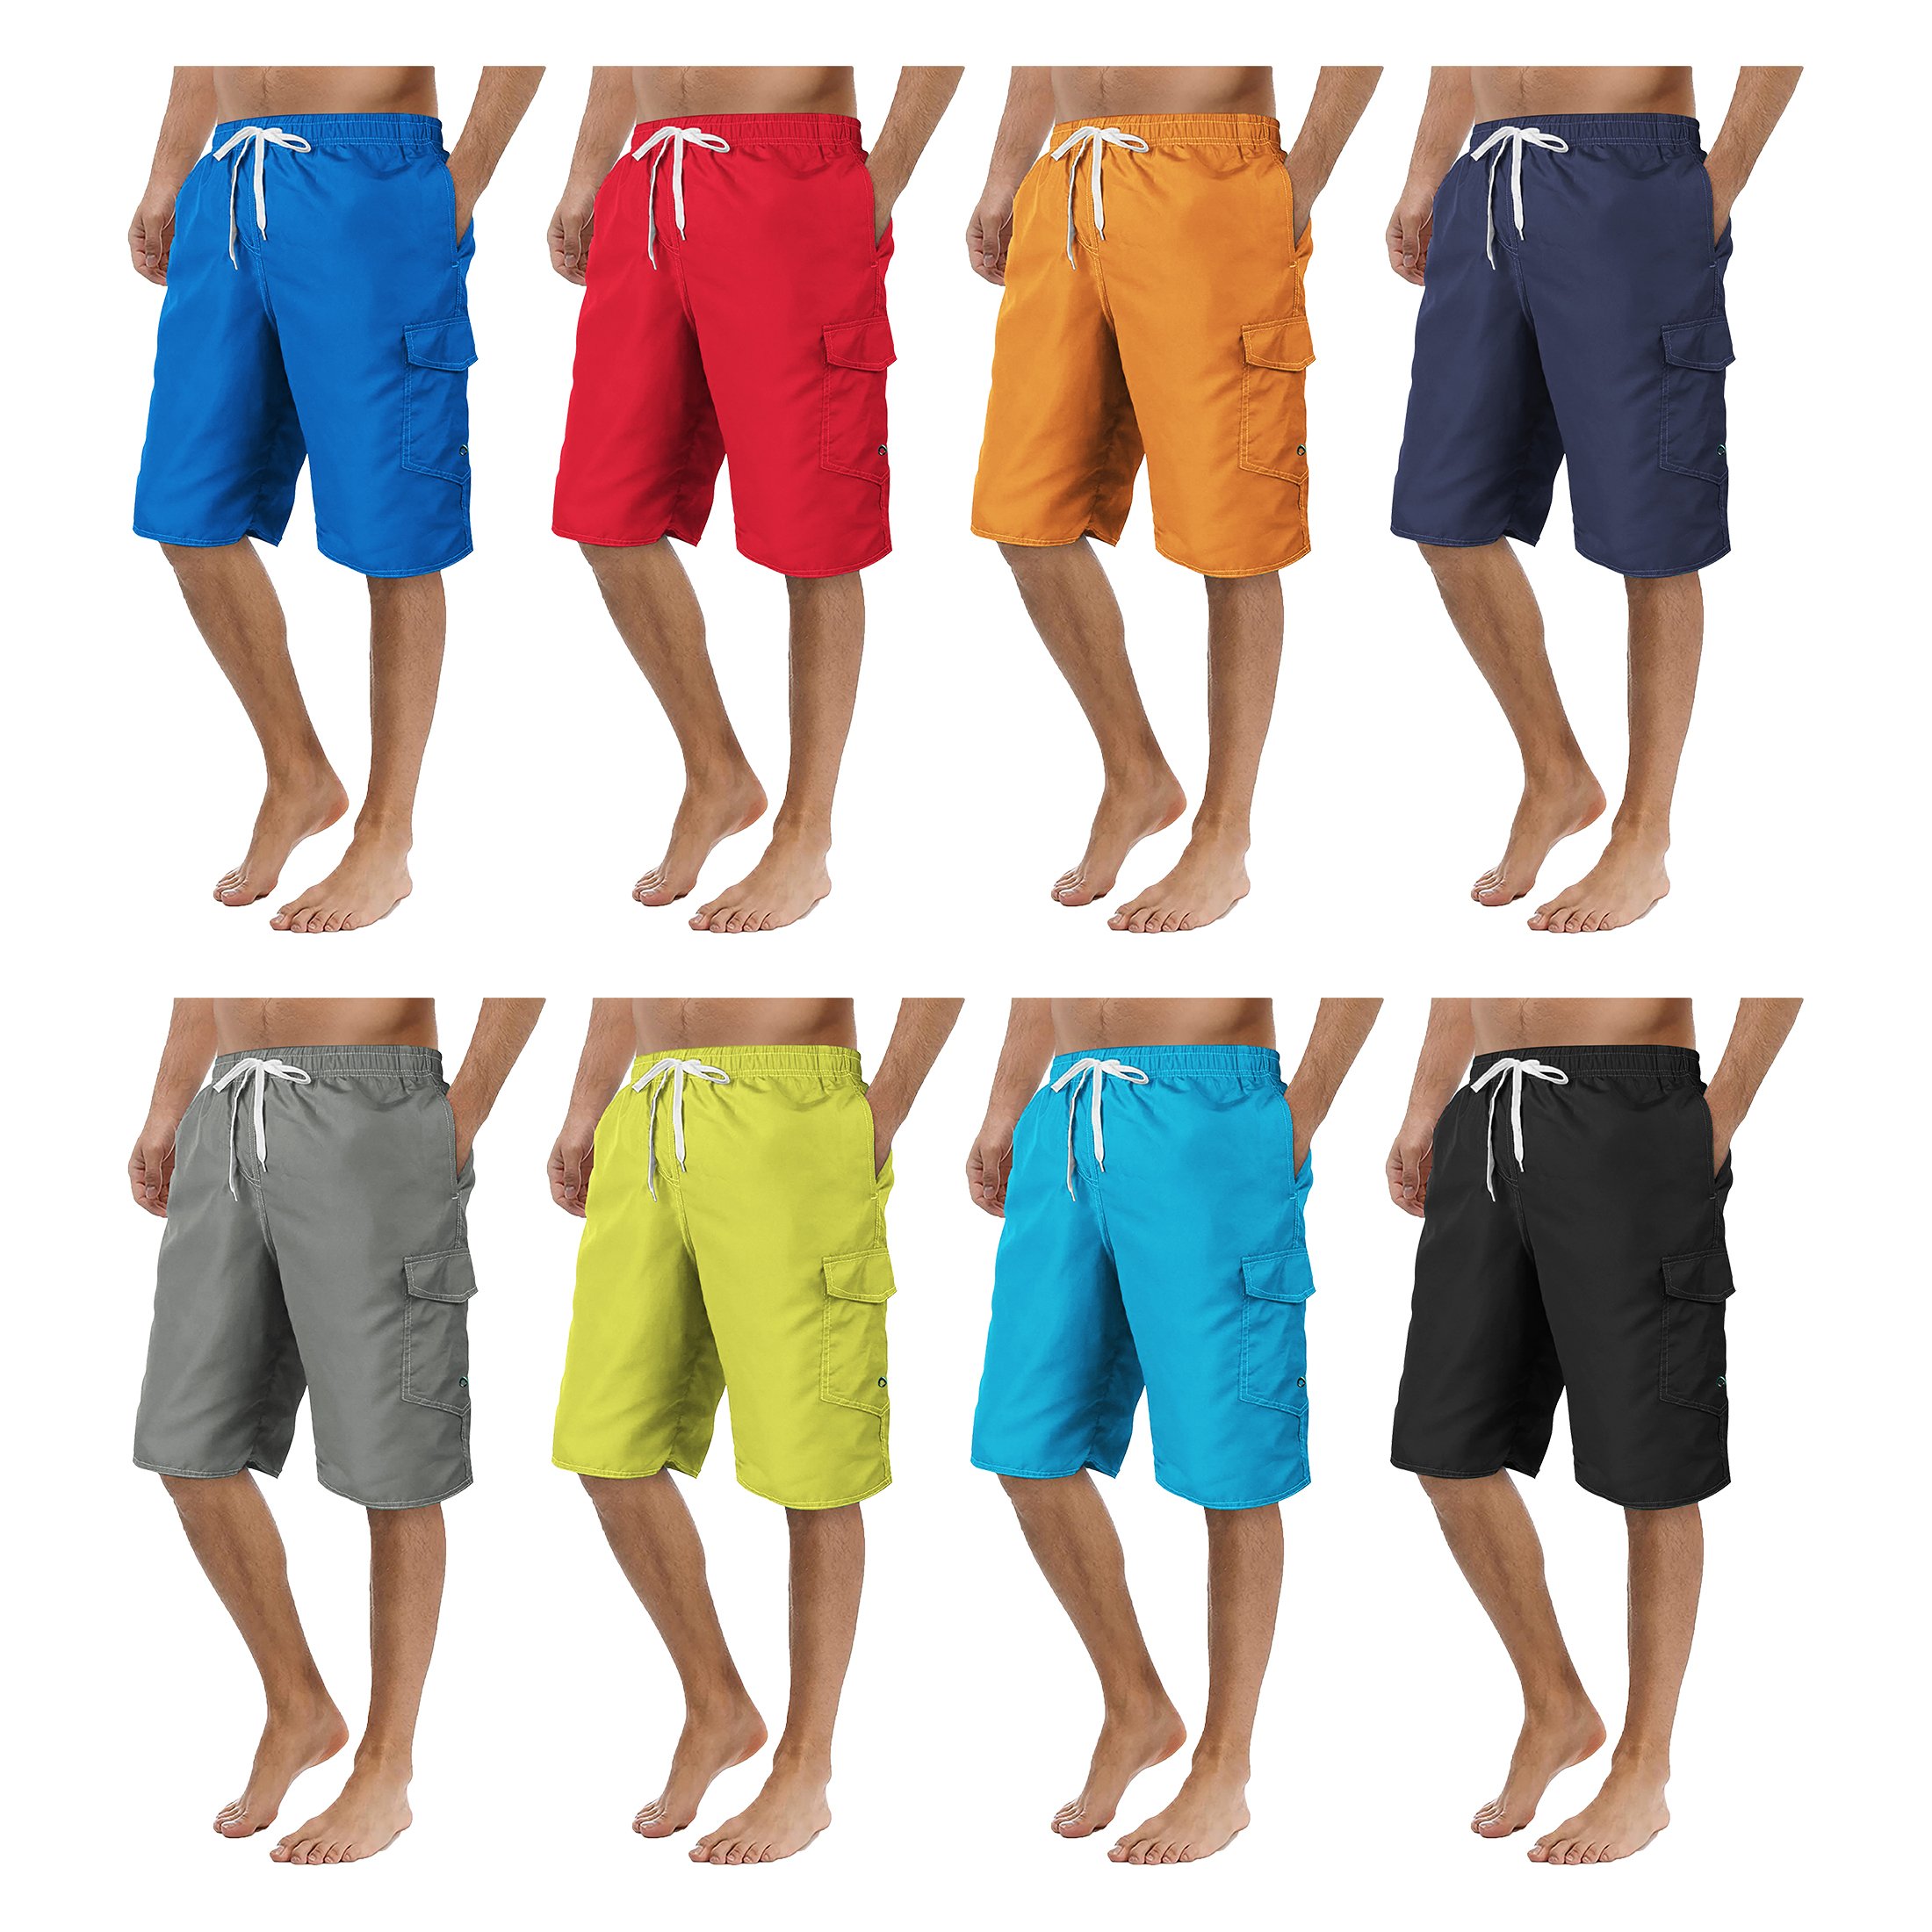 4-Pack Men's Quick Dry Cargo Swim Trunks Beachwear Bathing Suits With Pockets Solid Flex Board Shorts - XL